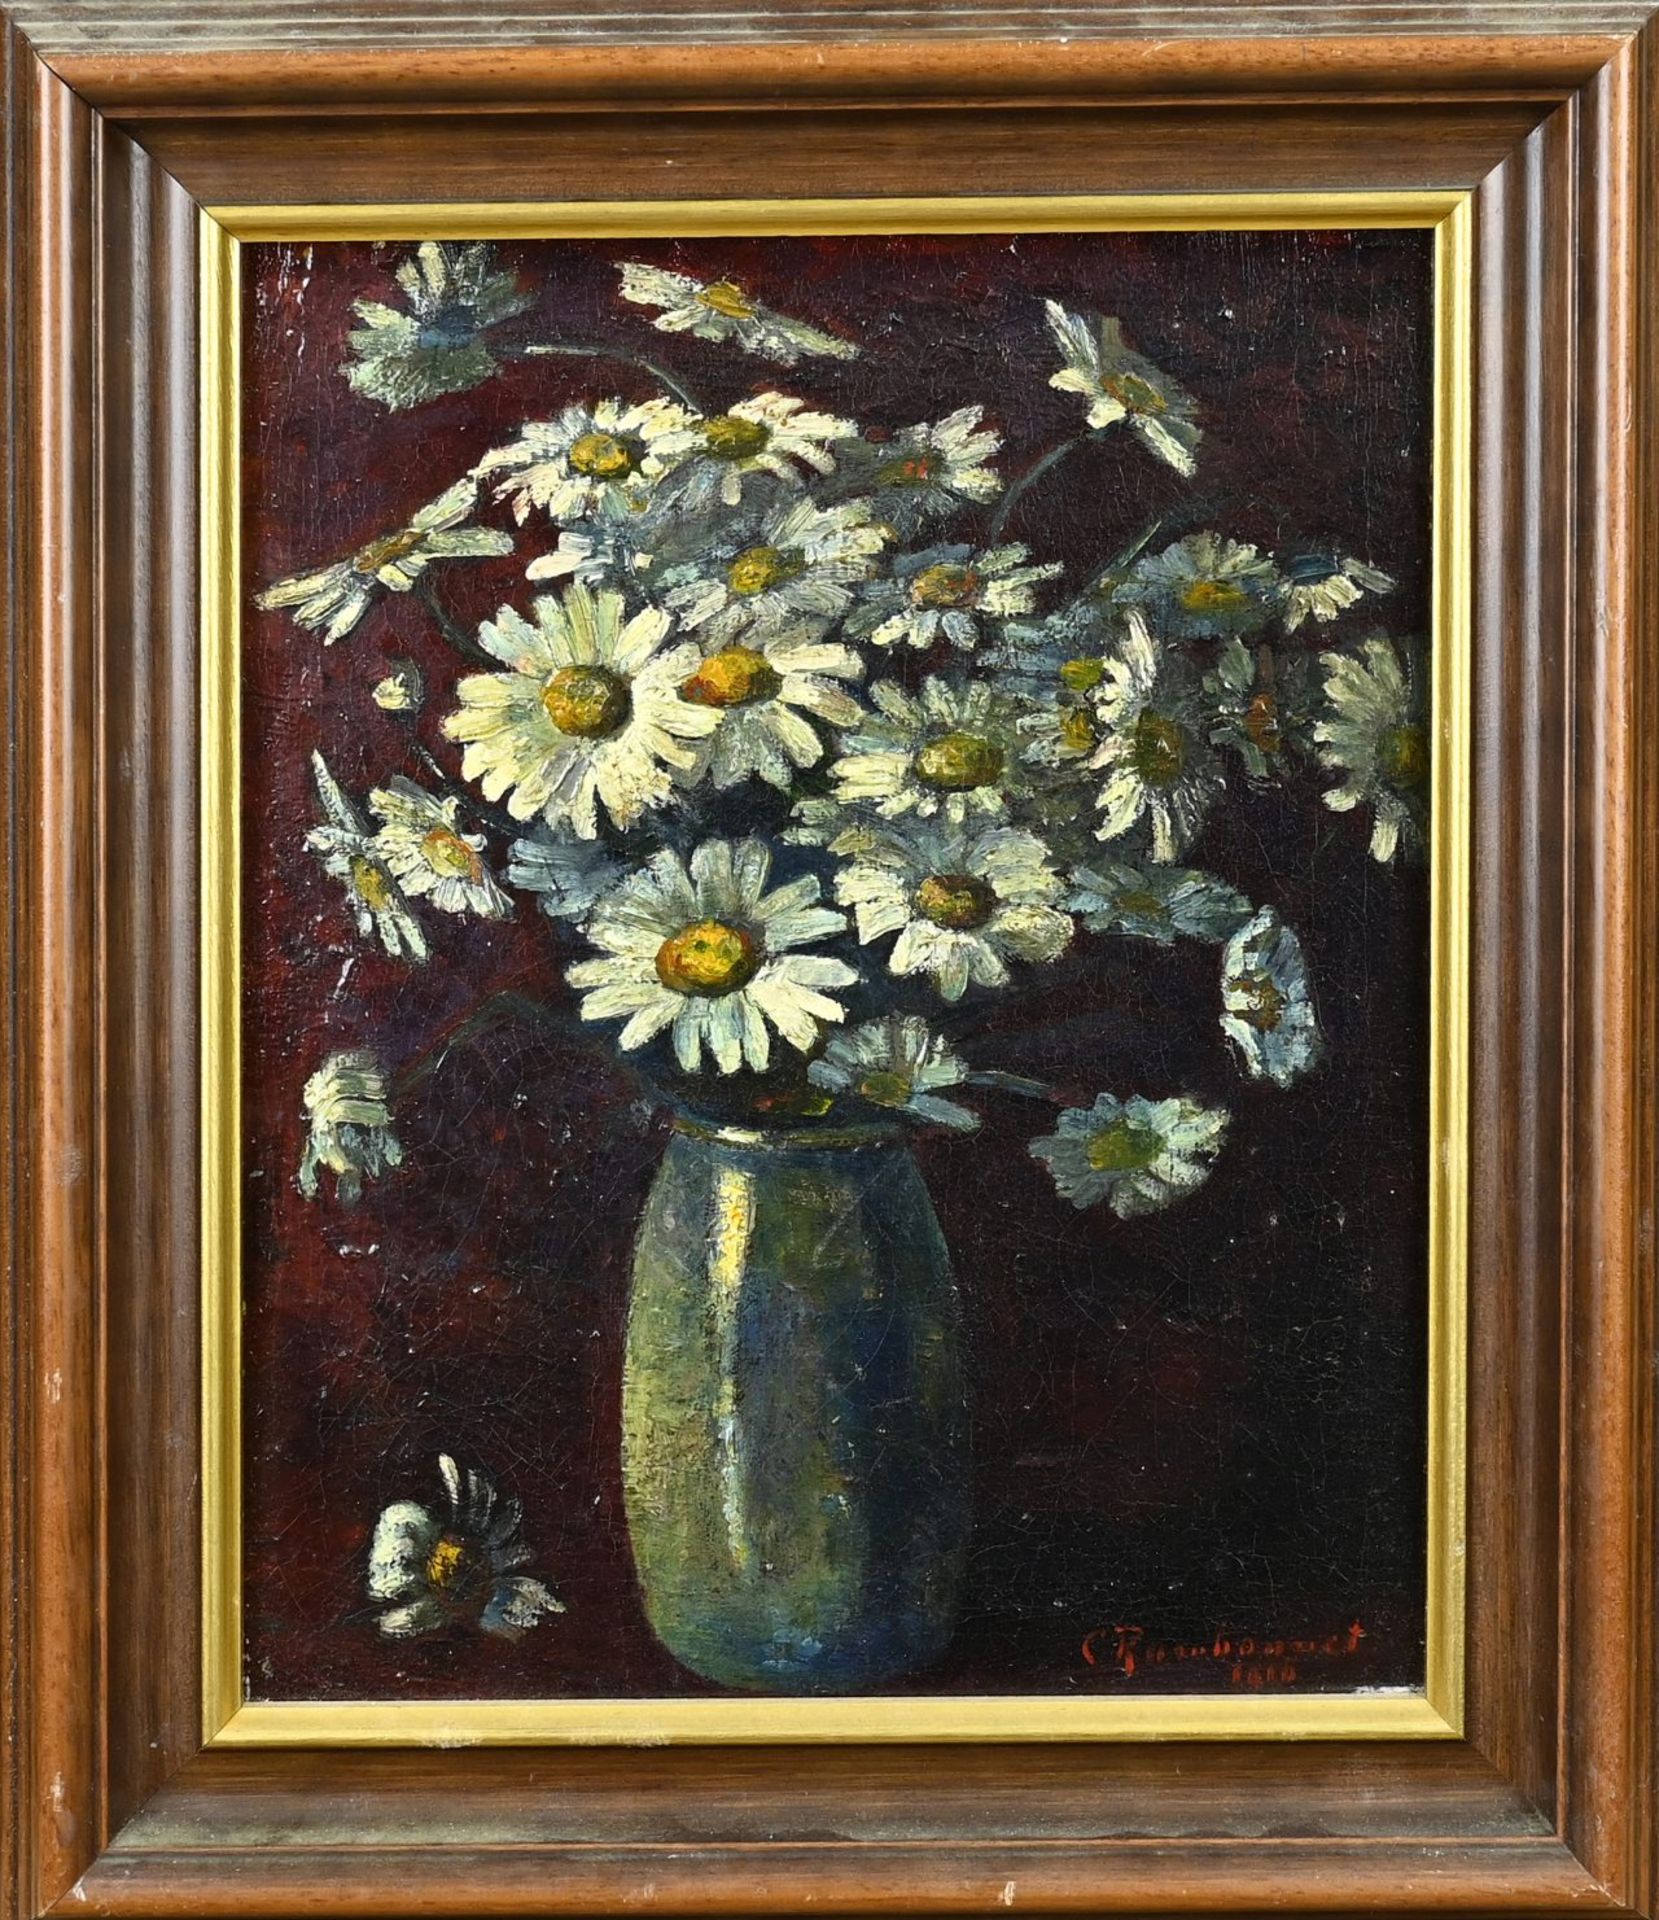 C. Rambonnet, Vase with flowers